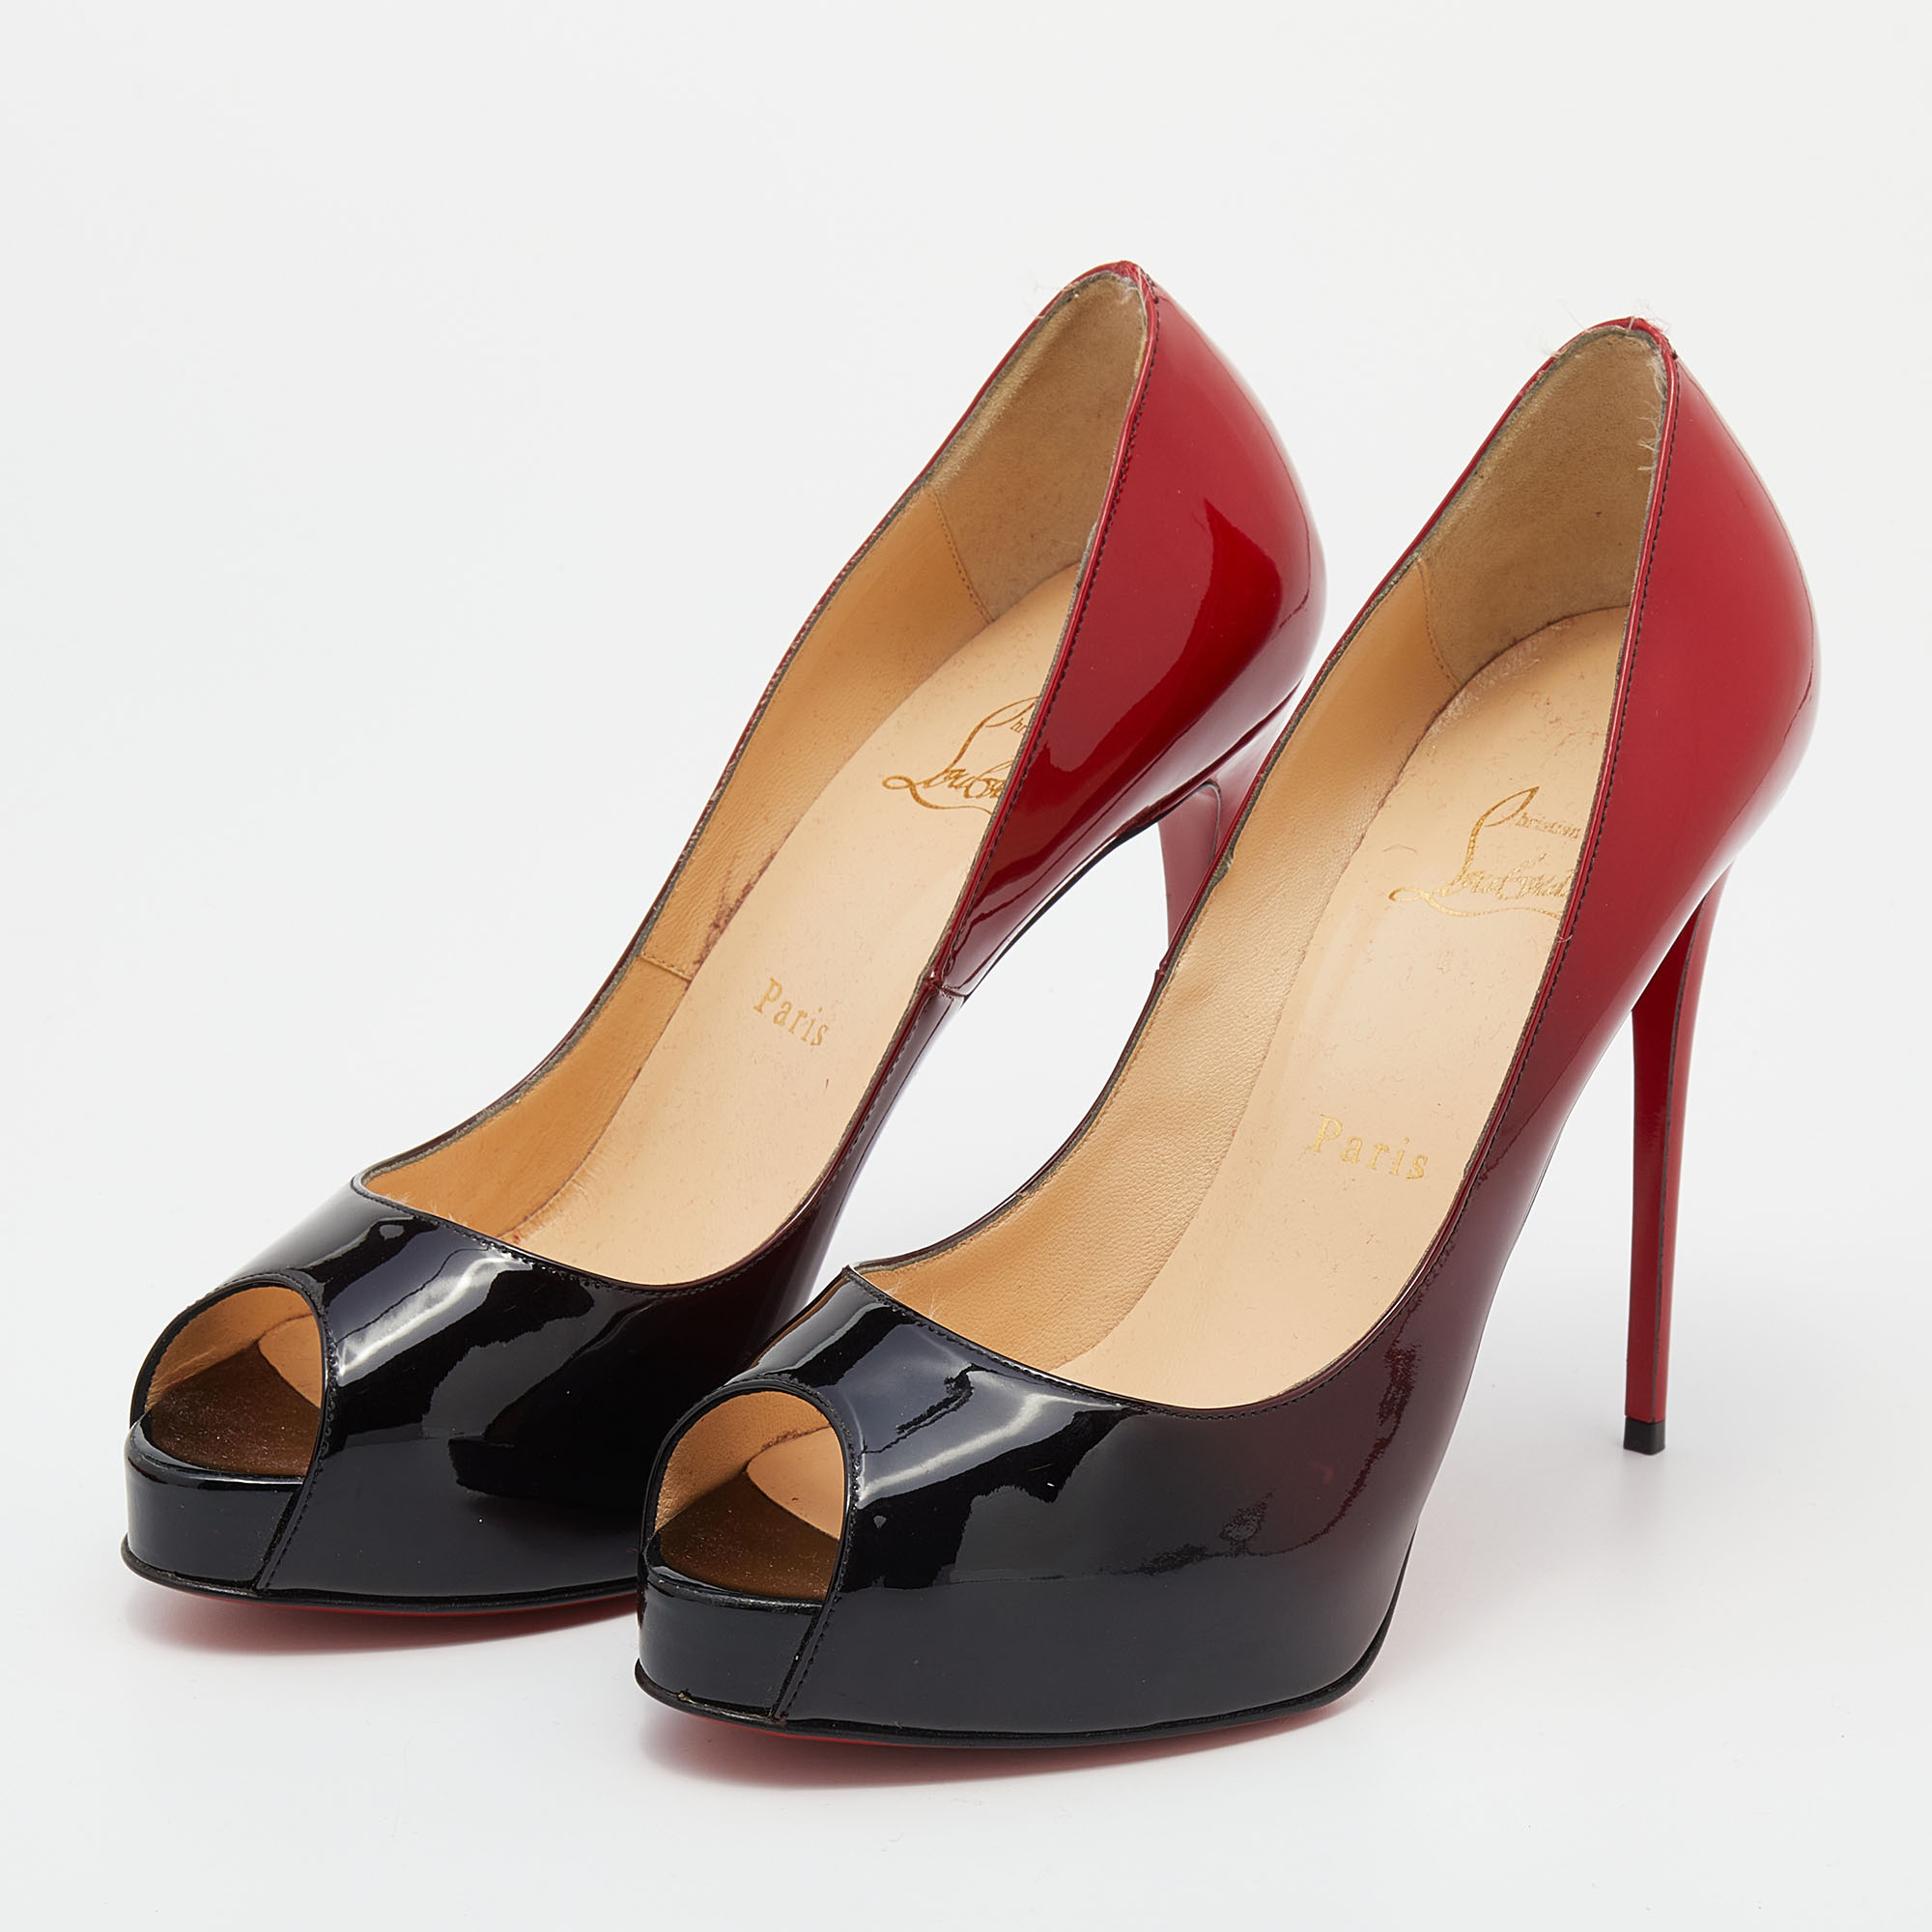 

Christian Louboutin Black/Red Ombre Patent Leather New Very Prive Peep Toe Pumps Size